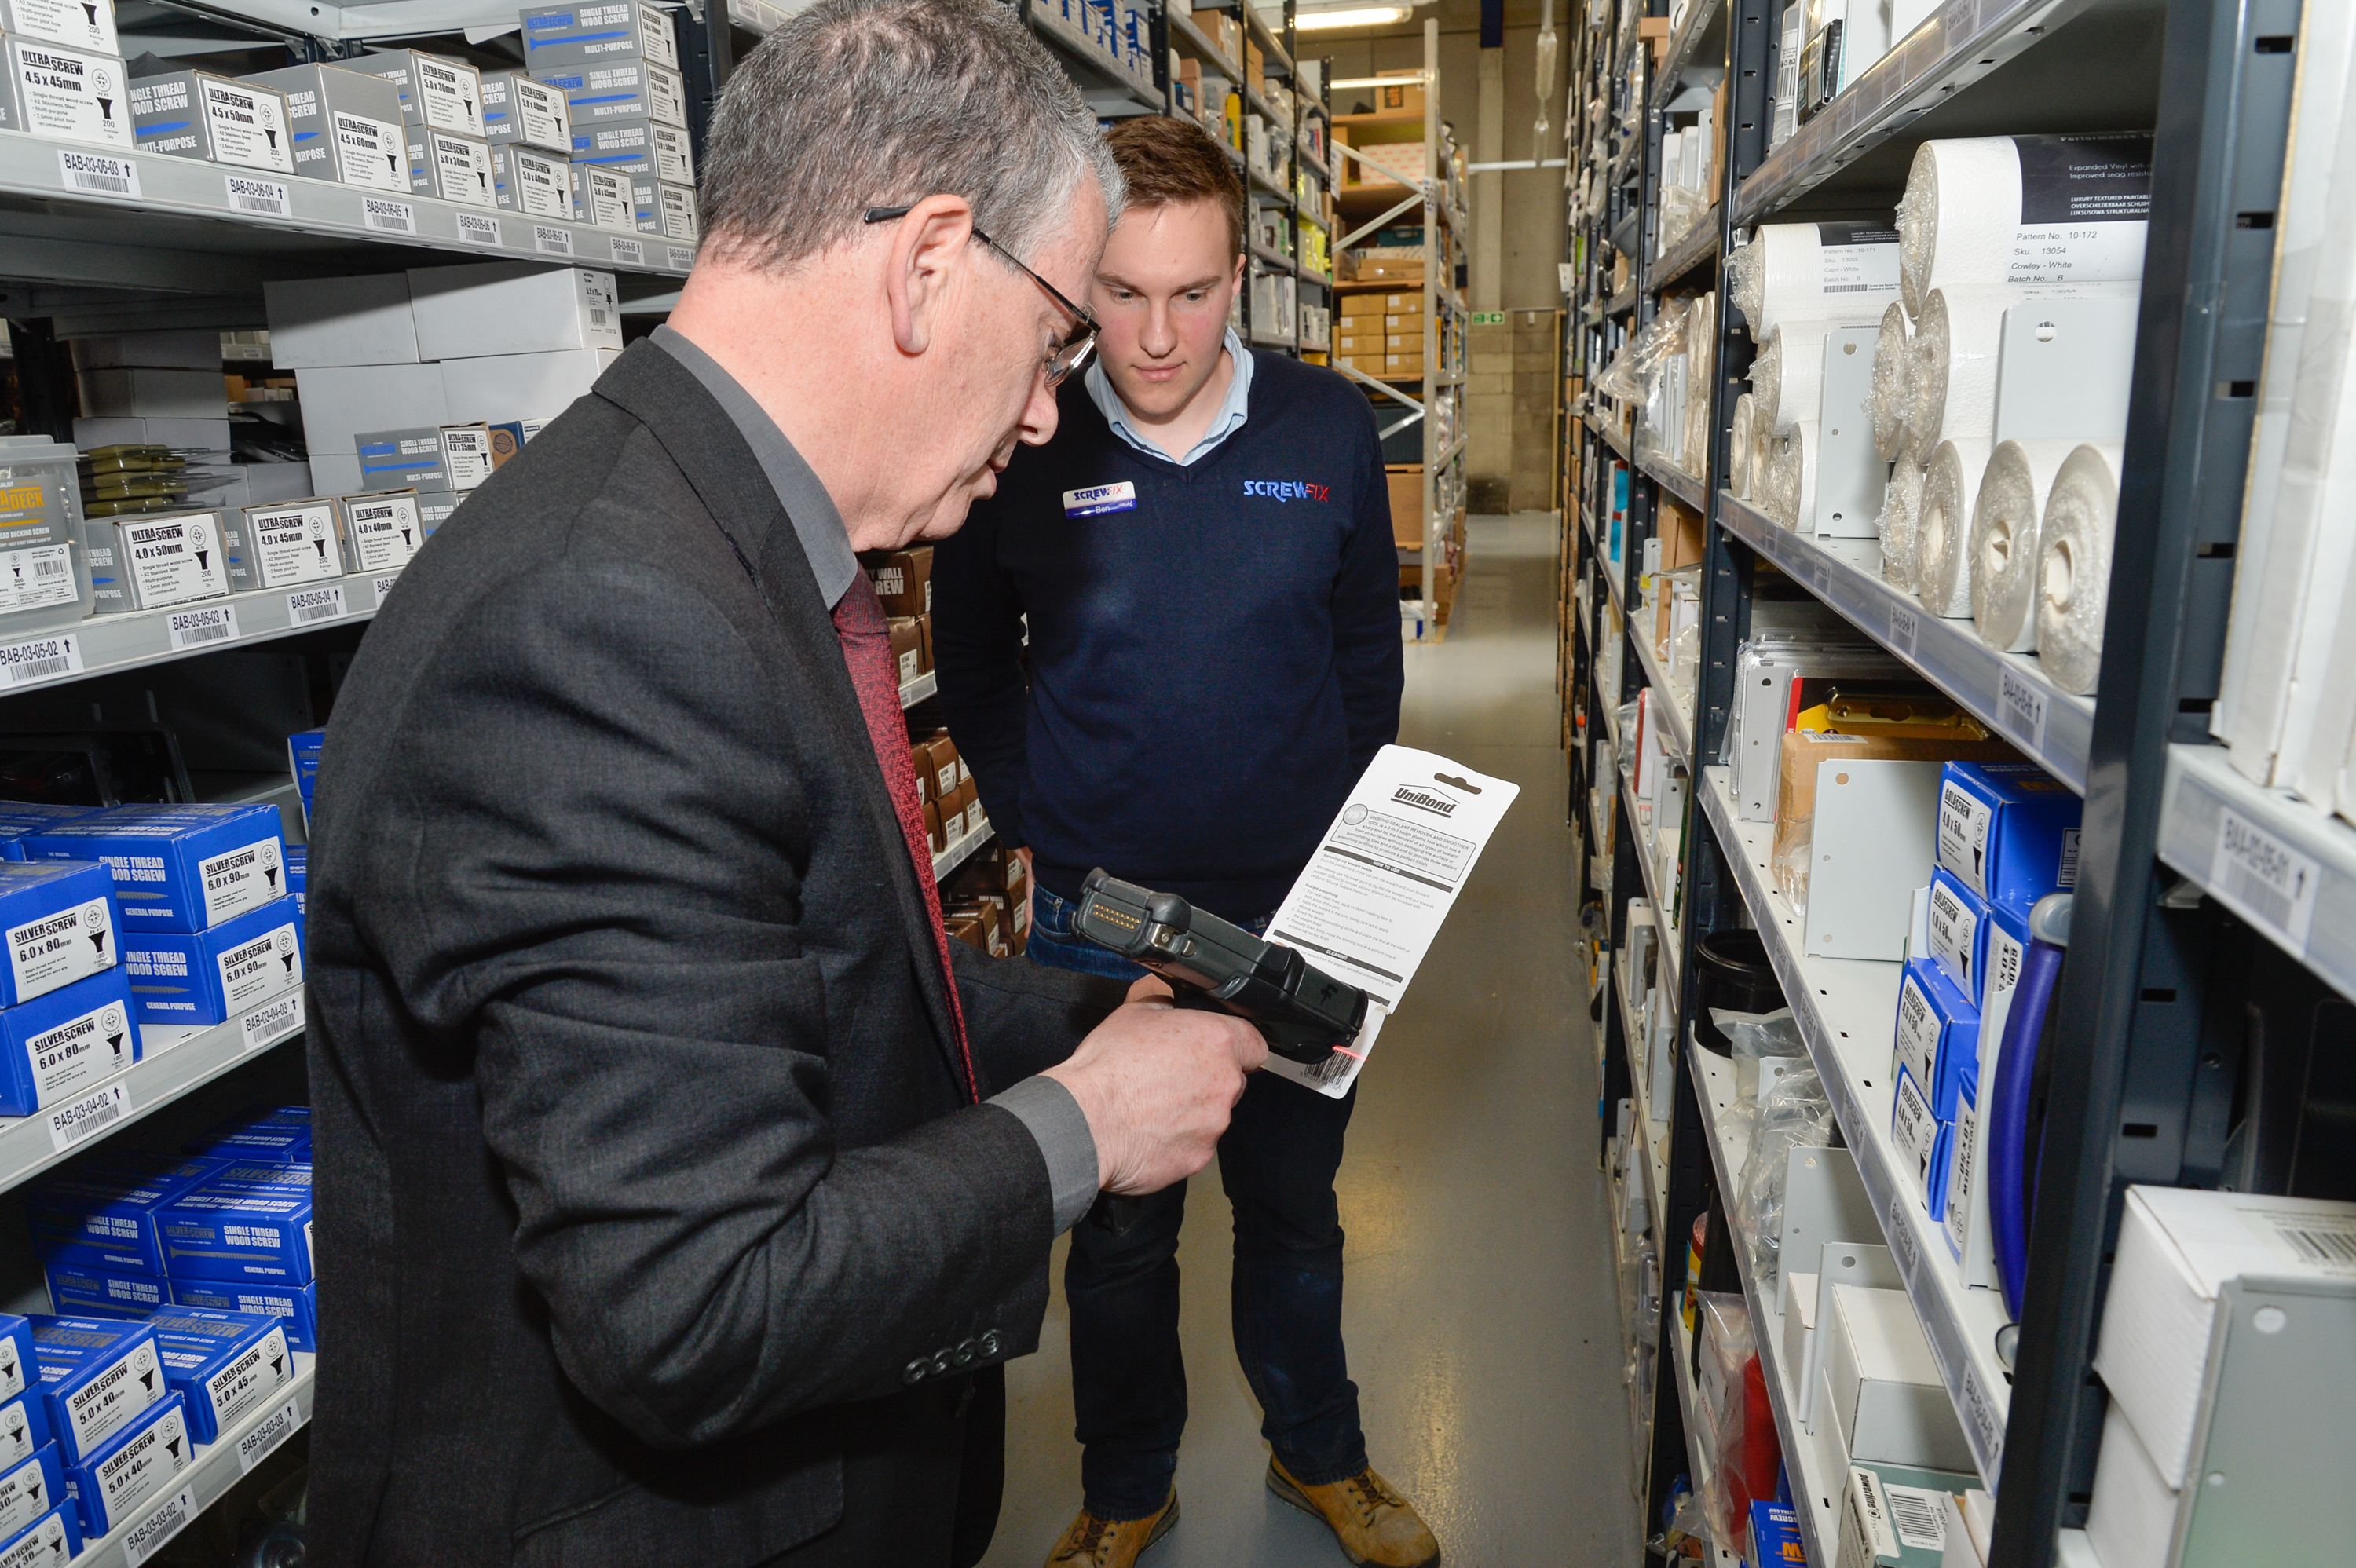 Parliamentary candidate, Mike Thornton visits local Screwfix